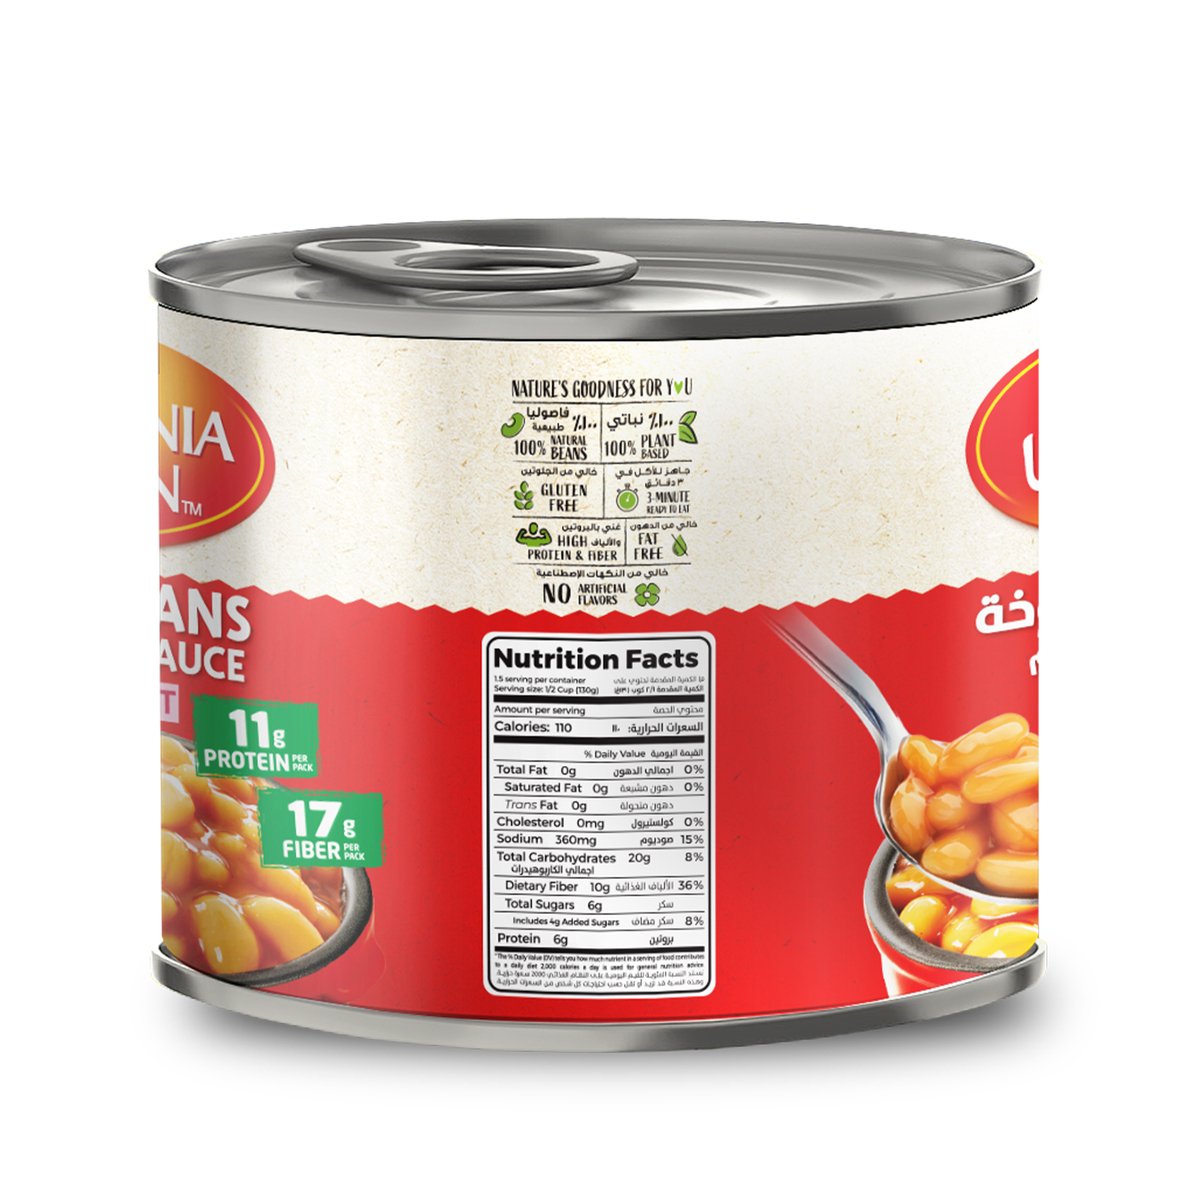 California Garden Canned Baked Beans In Tomato Sauce 220 g